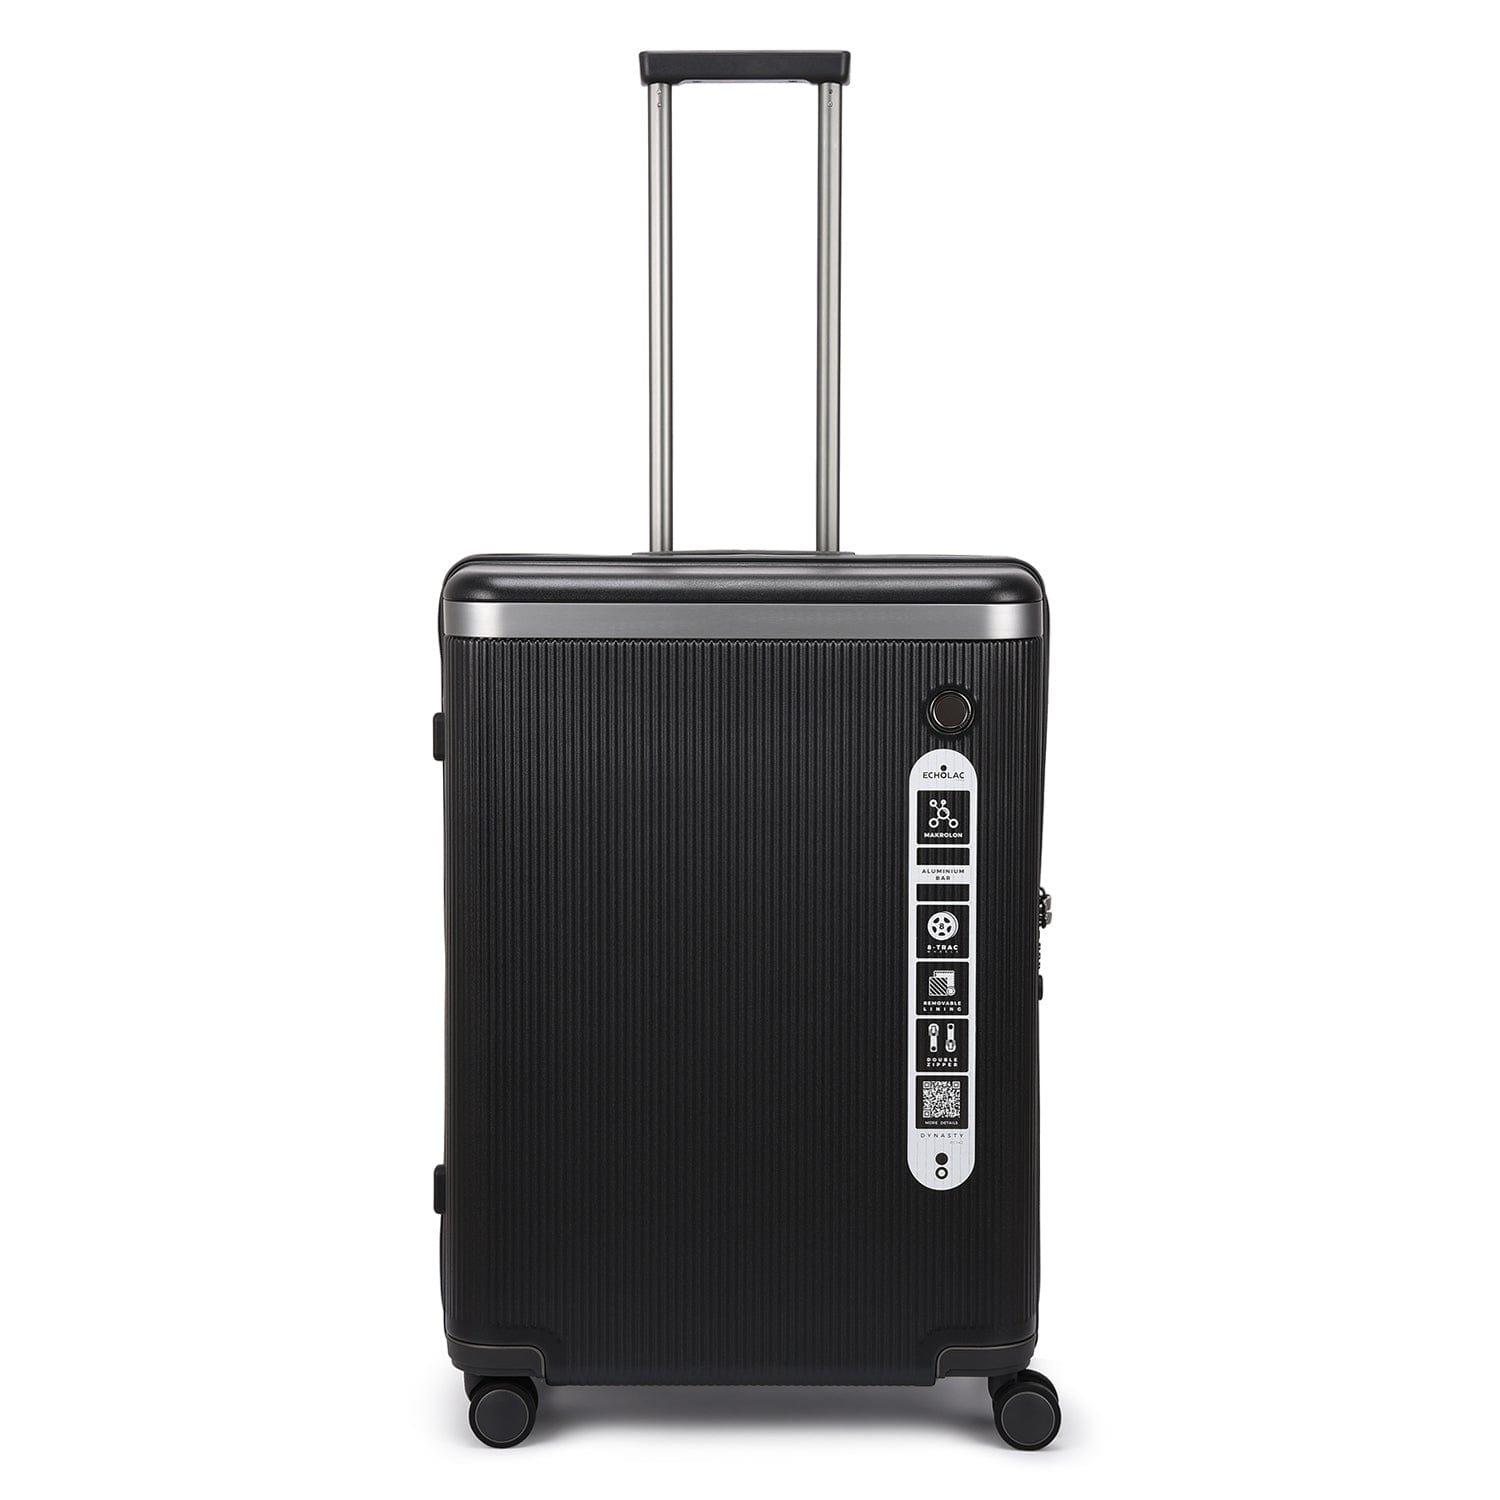 Echolac Dynasty 67cm Hardcase Non-Expandable 4 Double Wheel Check-In Luggage Trolley Vulcan Grey - PC142 24 VULCAN GREY